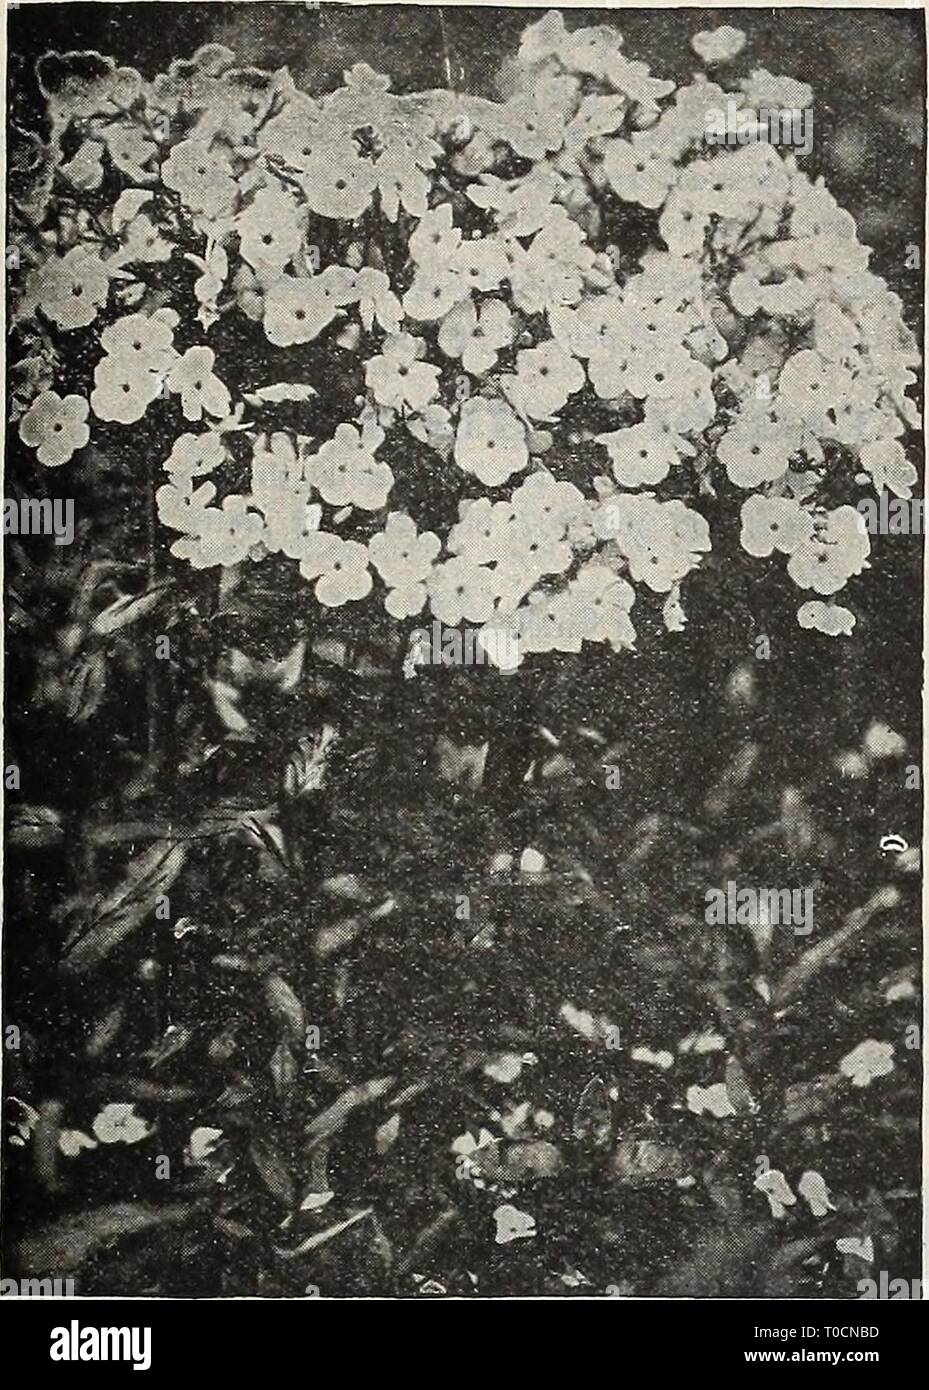 Dreer's garden book 1918 (1918) Dreer's garden book 1918 dreersgardenbook1918henr Year: 1918  1 -HBHarAPRgR:.-PHIIADELPHIA'.-PA- ^ST HARDY PERiMMlAL PLANTS 207    PHLOX AKENDSI A new race of Hardy Phlox which originated through the suc- cessful crossing of the early flowering popular Phlox Divaricata Canadensis with the showy hardy varieties of Phlox Decussata. The plants are of vigorous, branching habit, growing according to the variety, from 12 to 24 inches high. Coming into flower during the latter part of May, they continue in good condition for nearly two months, producing a mass of flowe Stock Photo